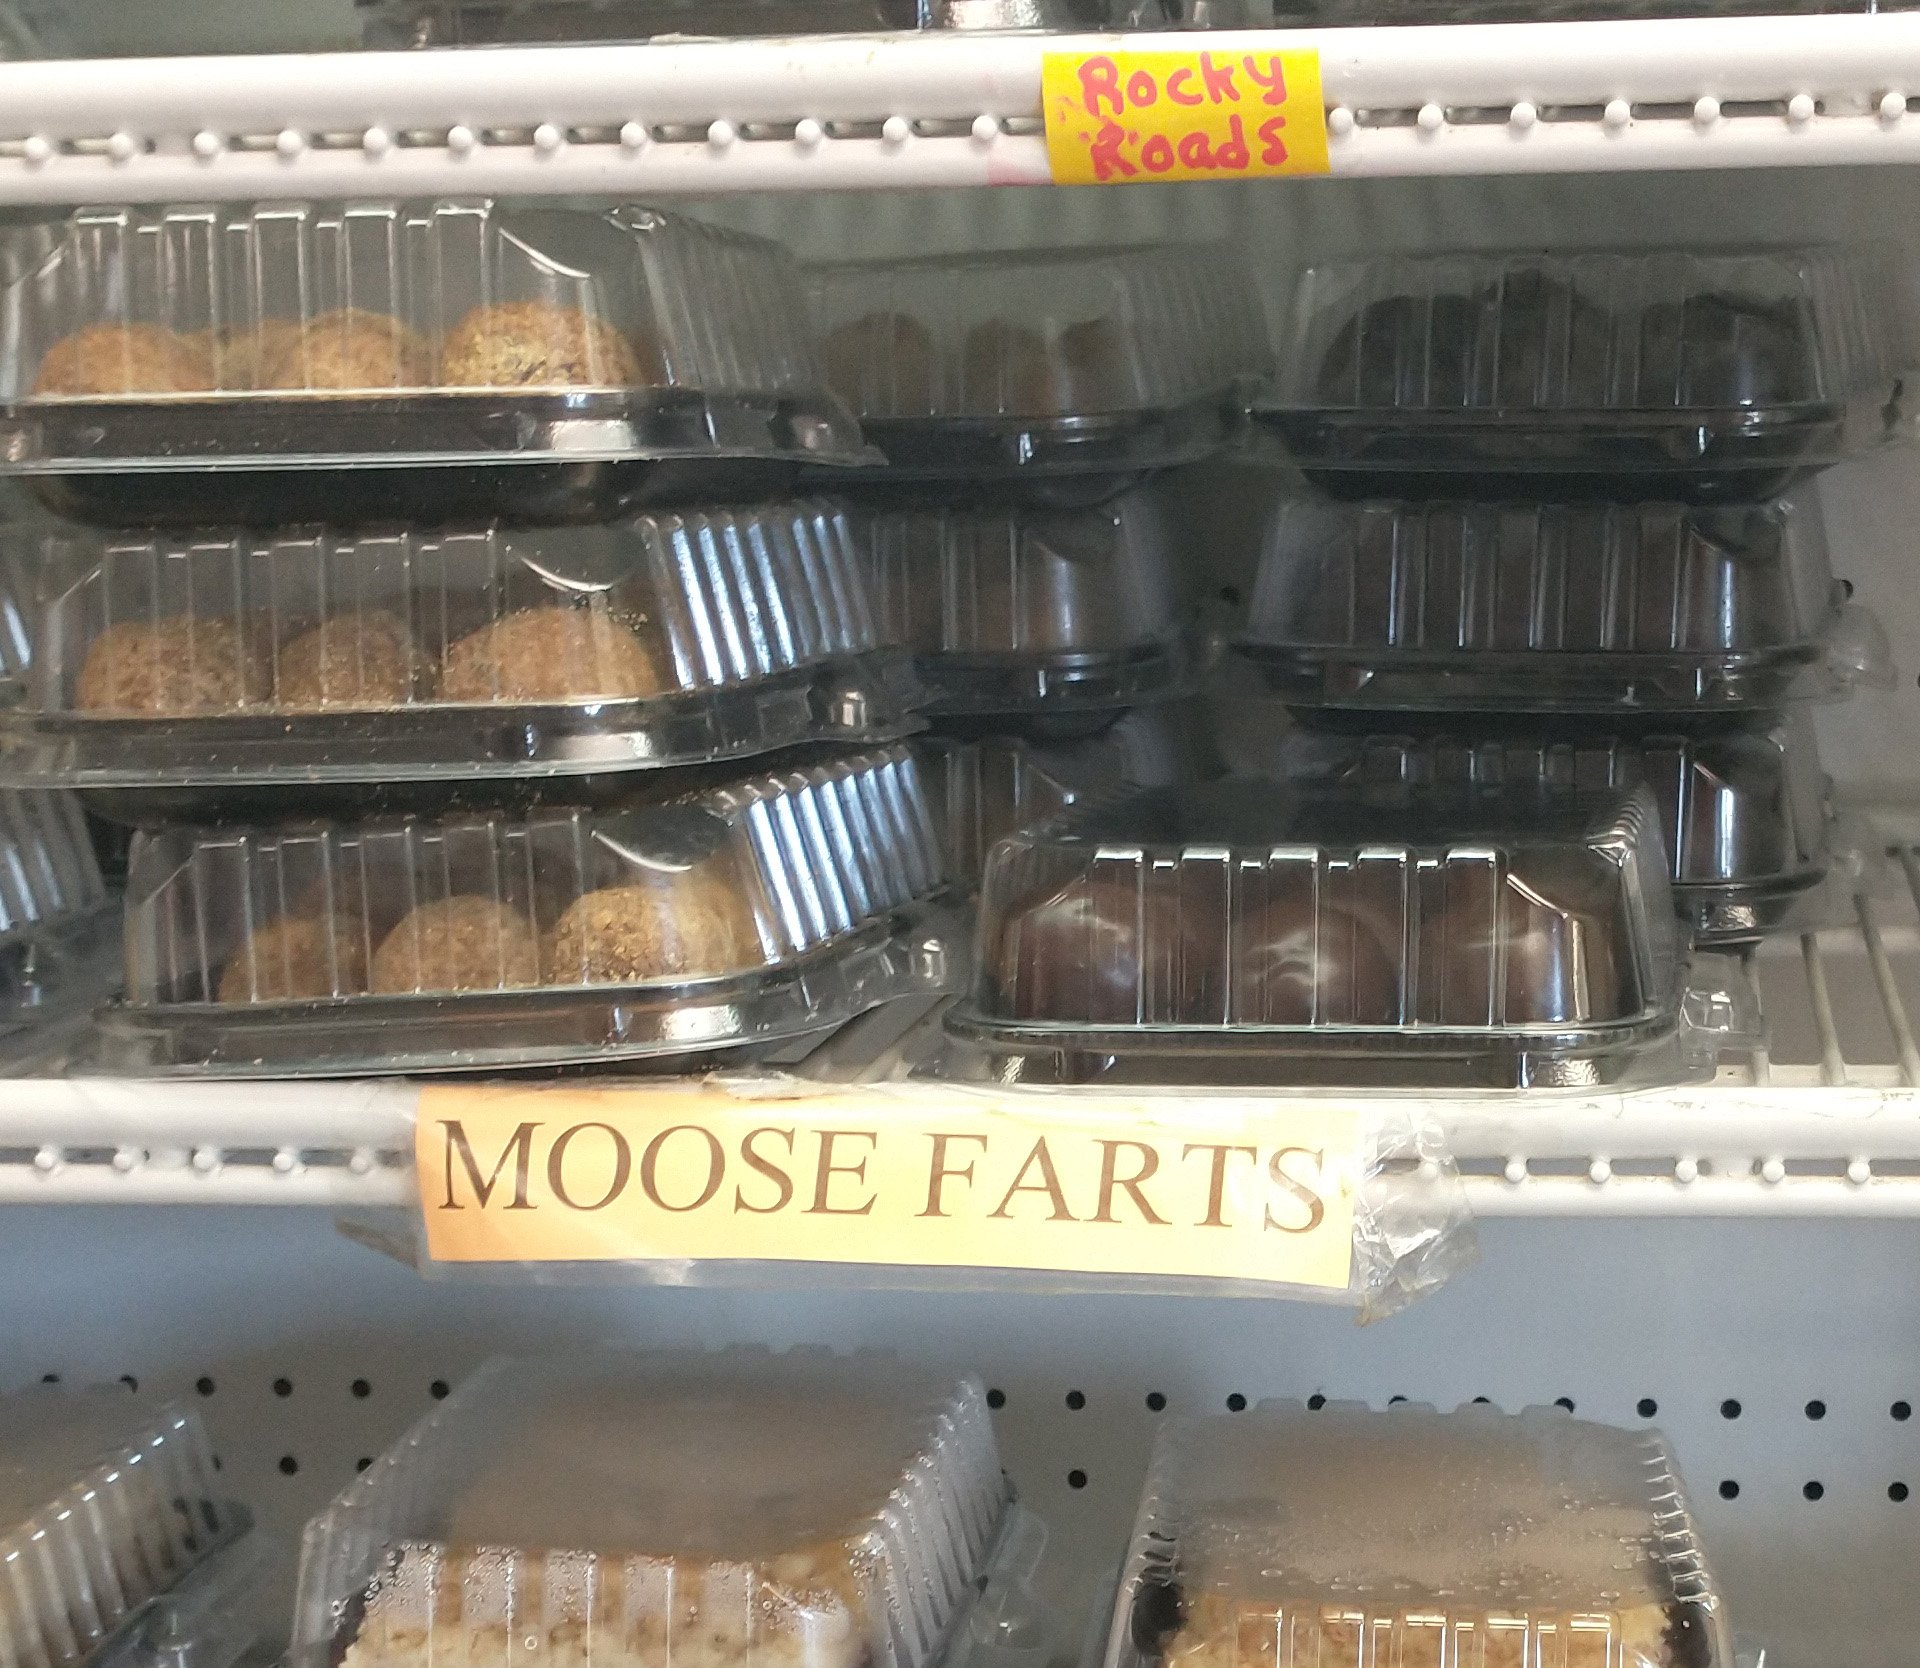 They also sell many baked goods. Had to grab a taste of Rosie's farts, of course.